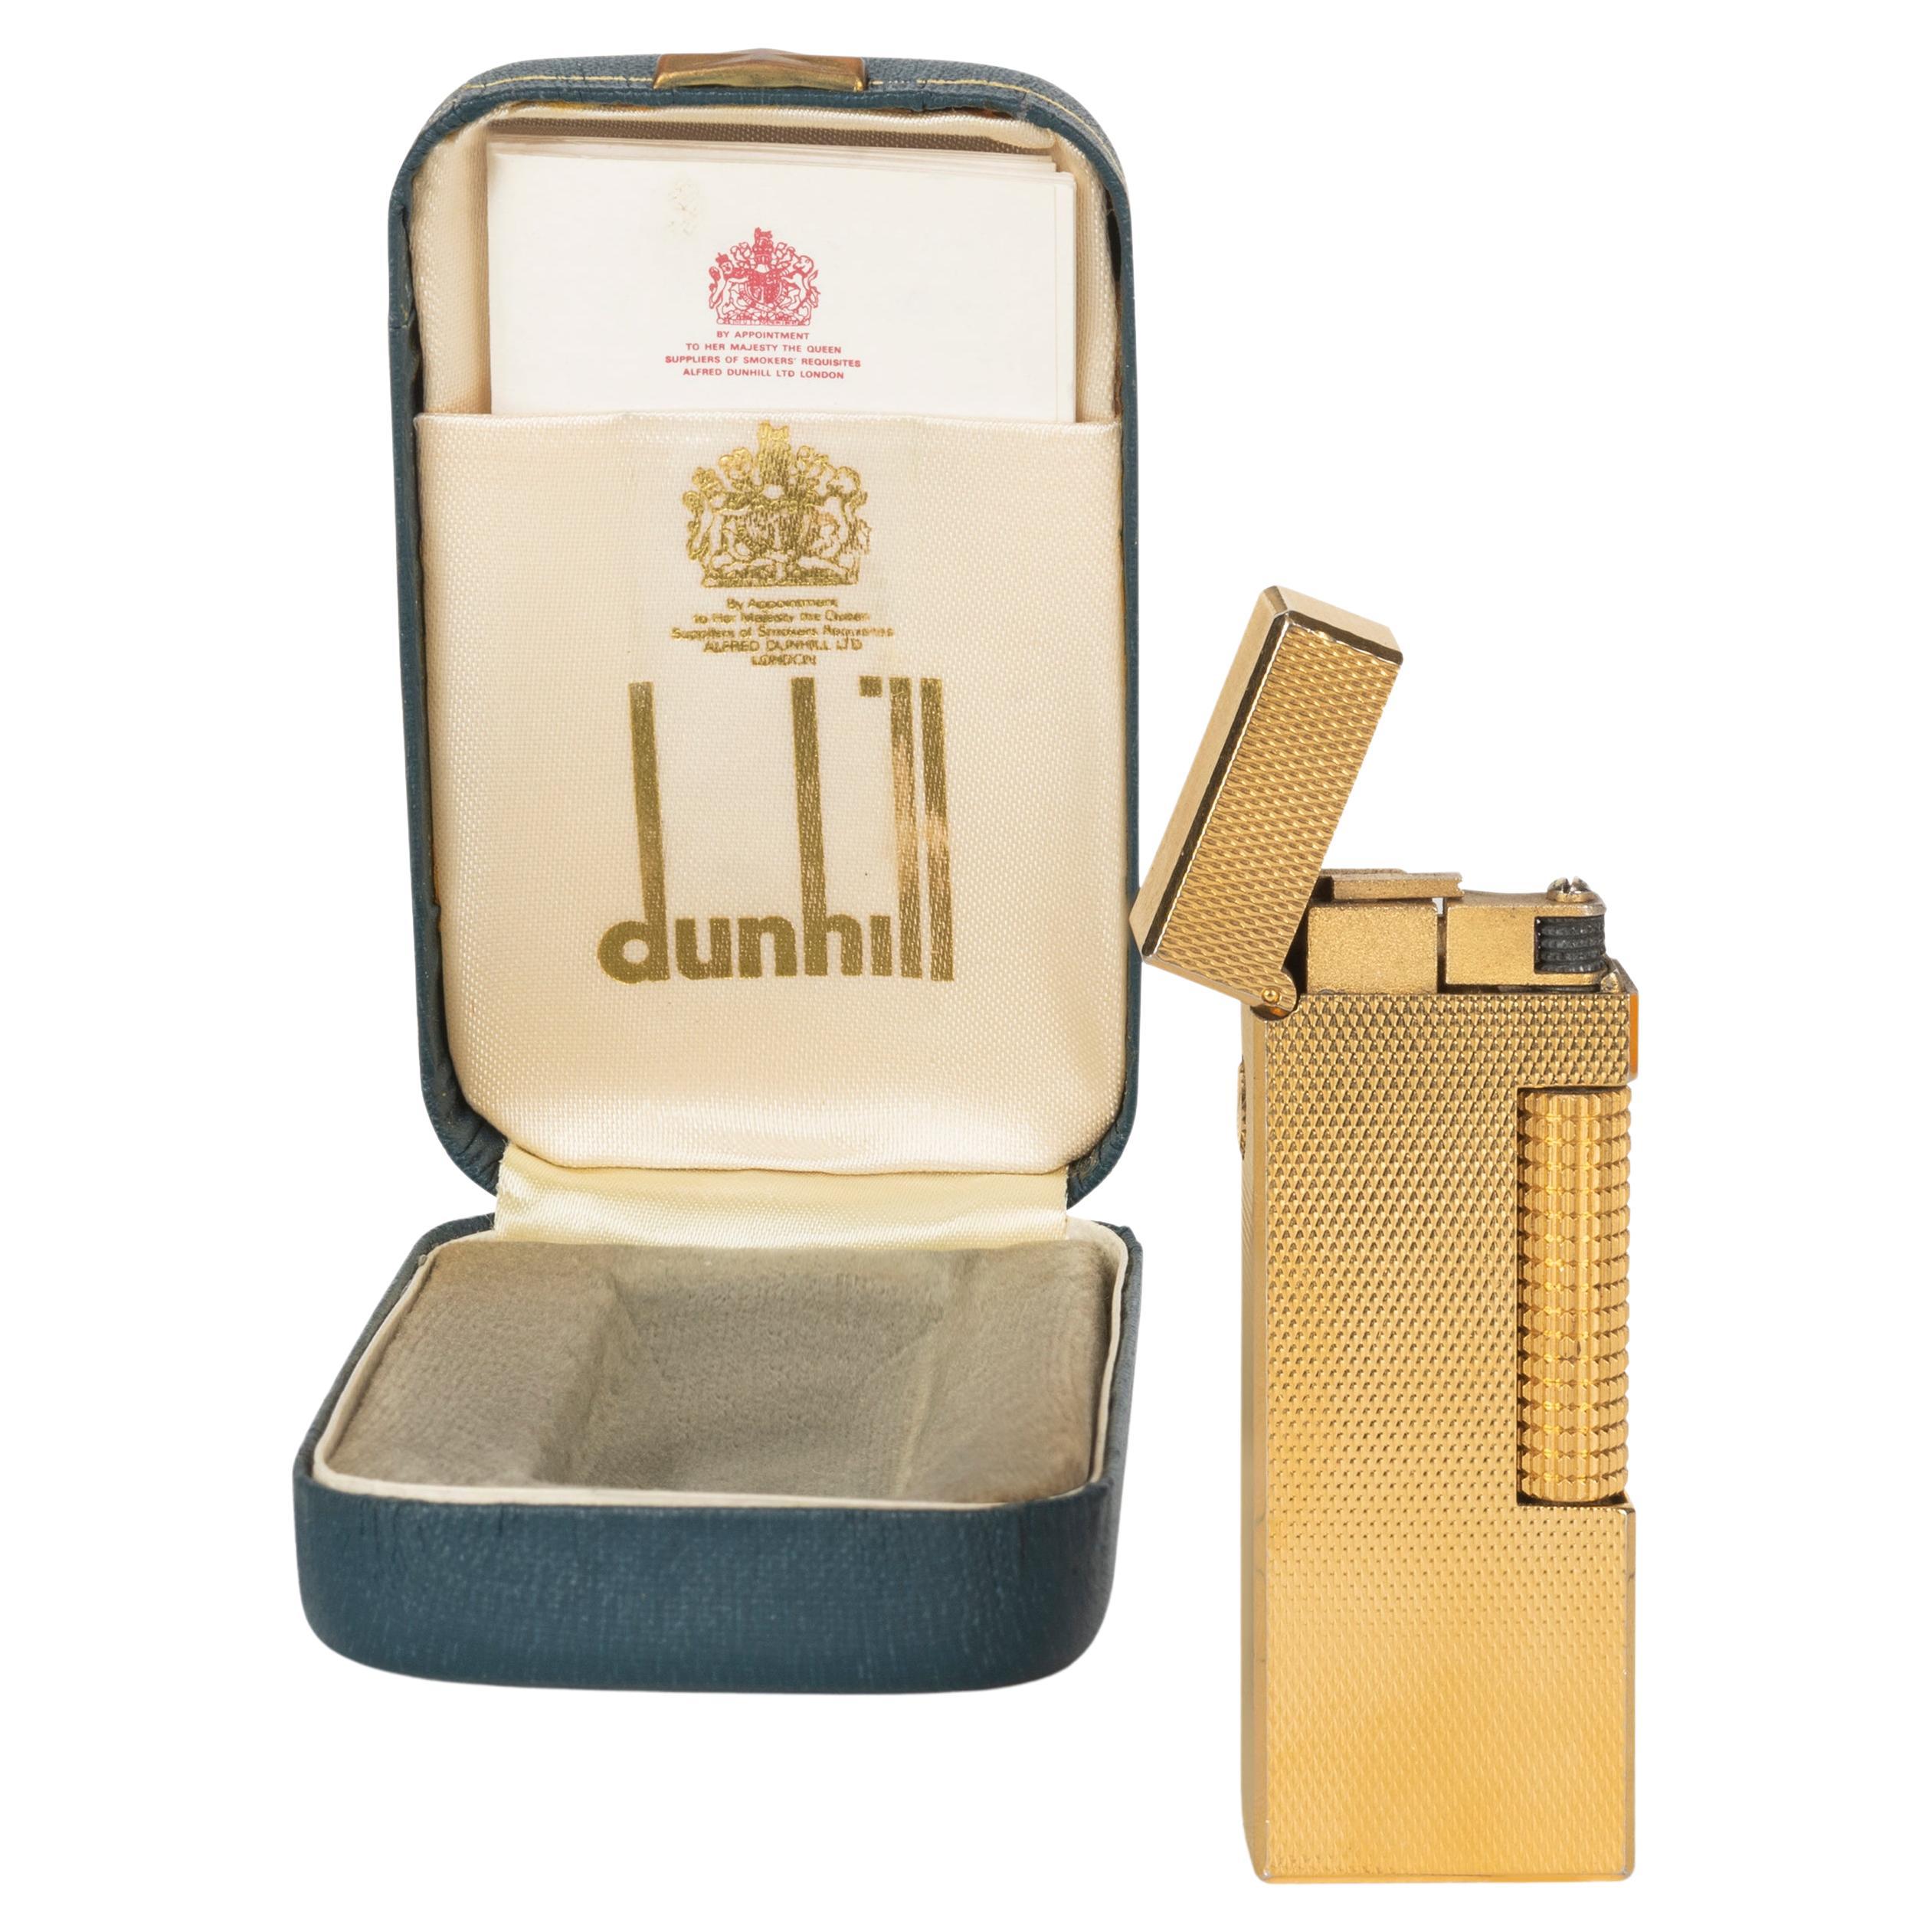 James Bond Iconic and Rare Vintage Dunhill Gold and Swiss Made Lighter